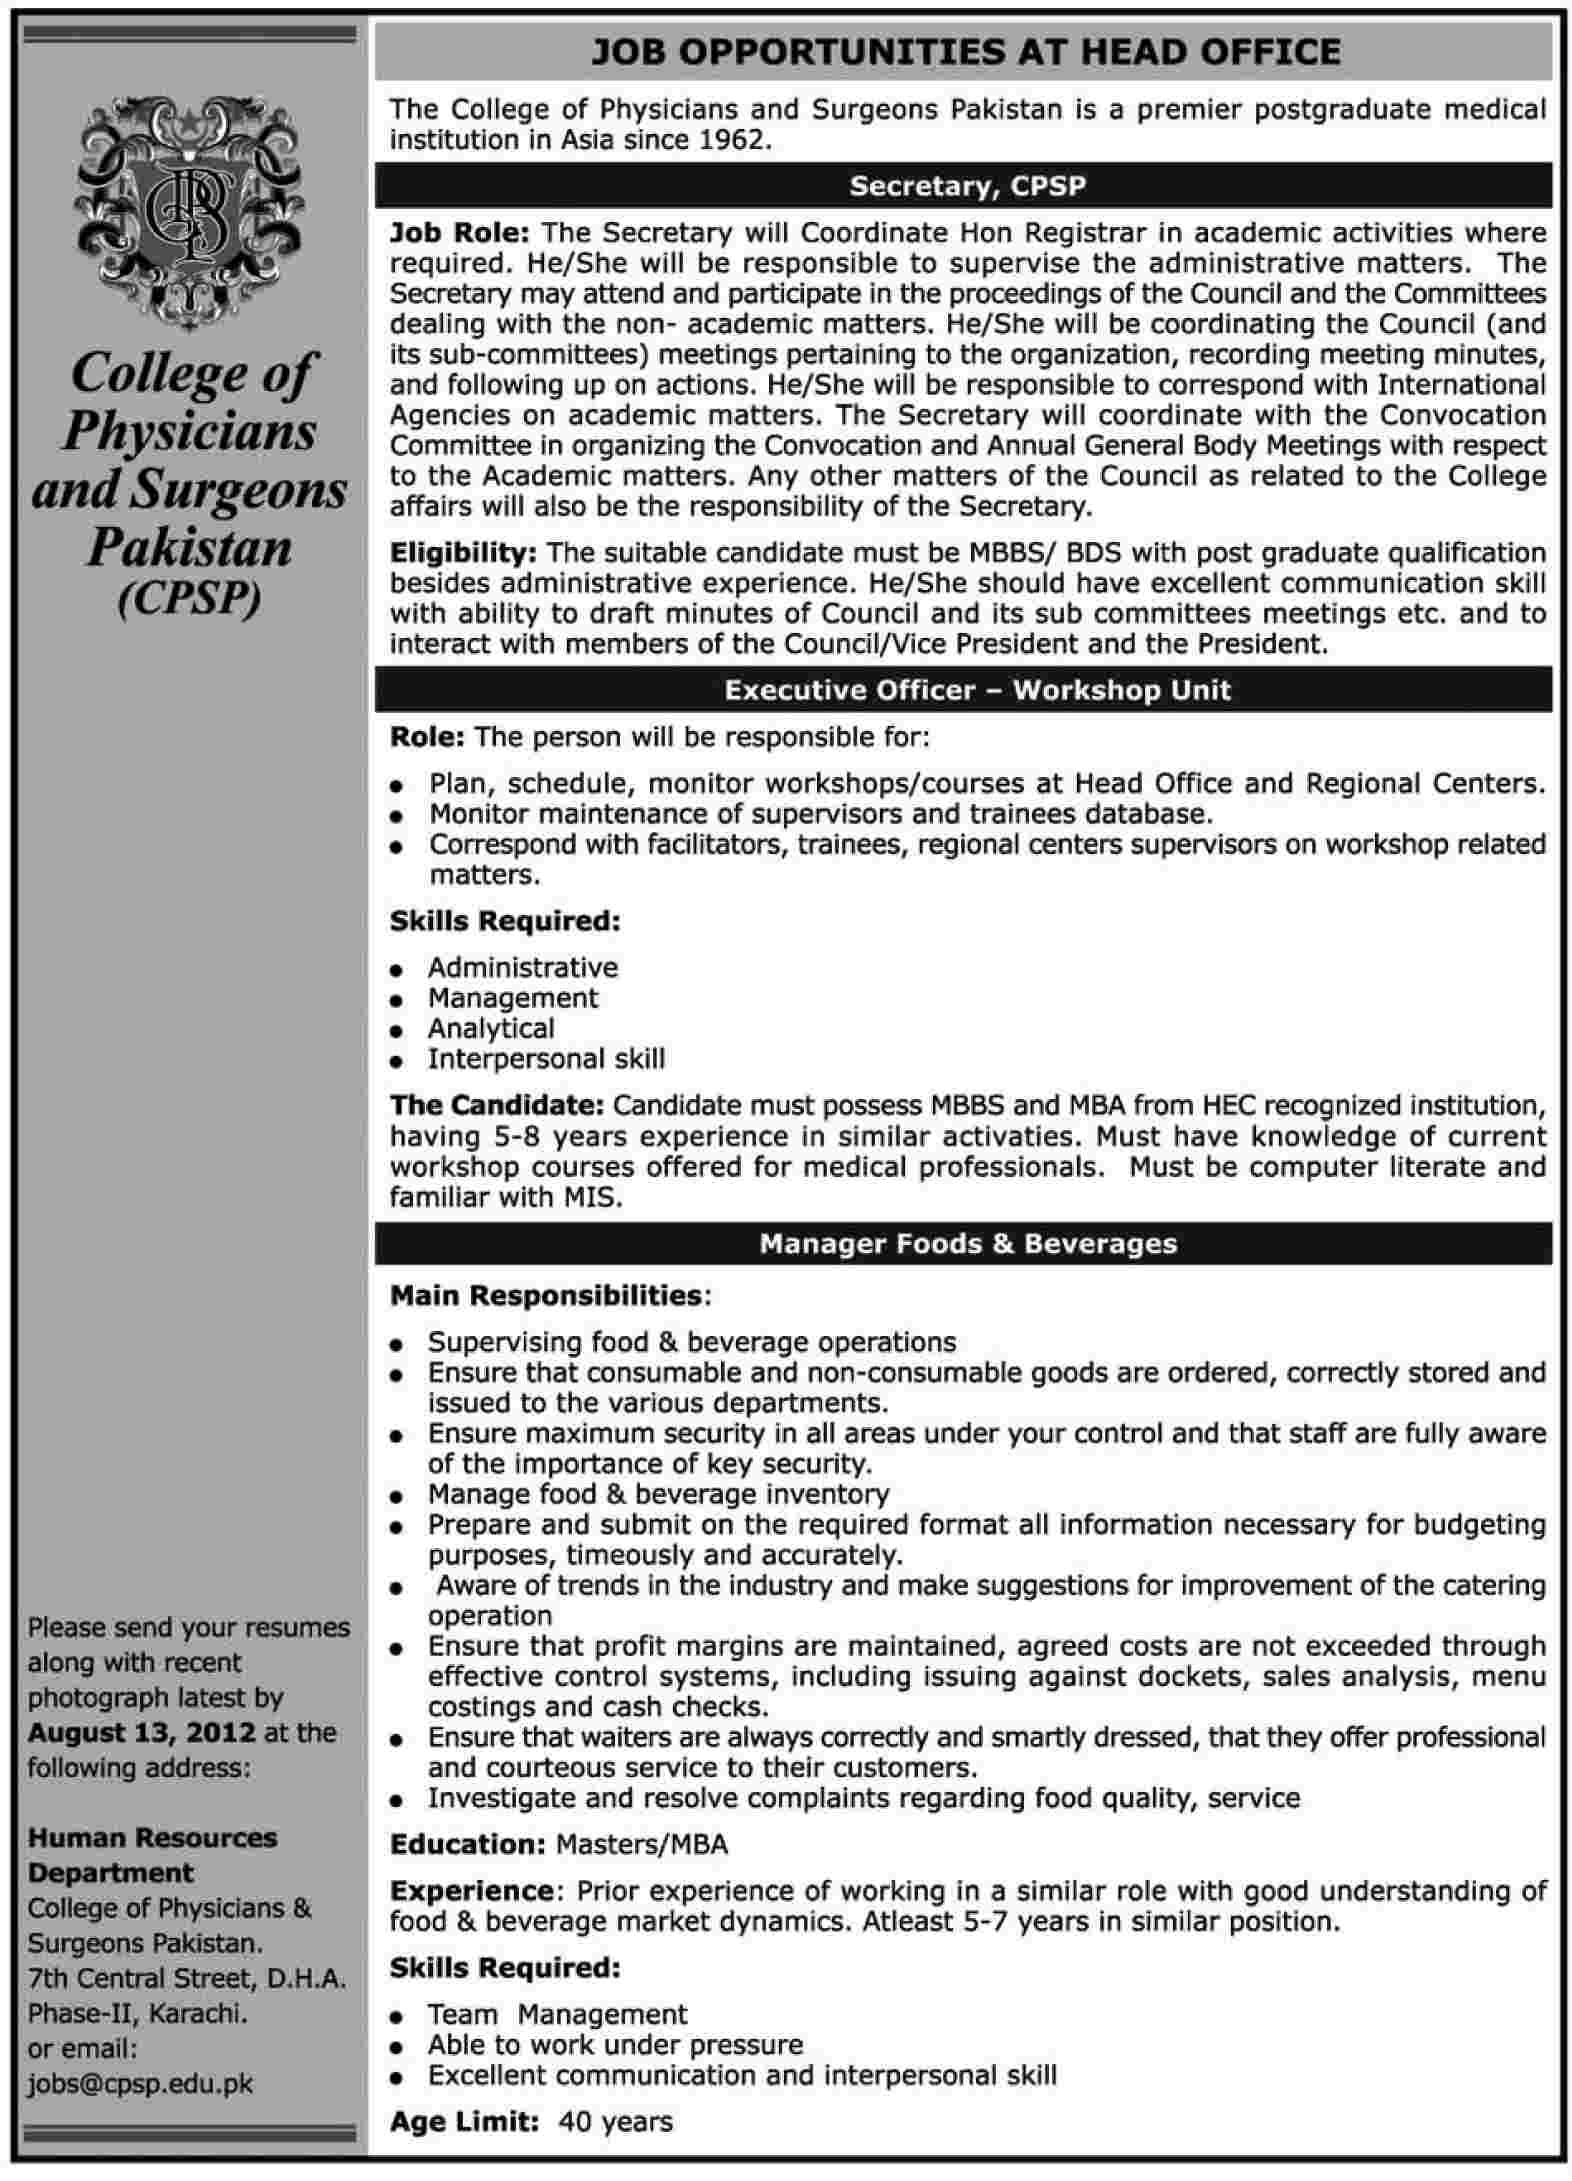 Jobs at College of Physicians and Surgeons Pakistan (CPSP)